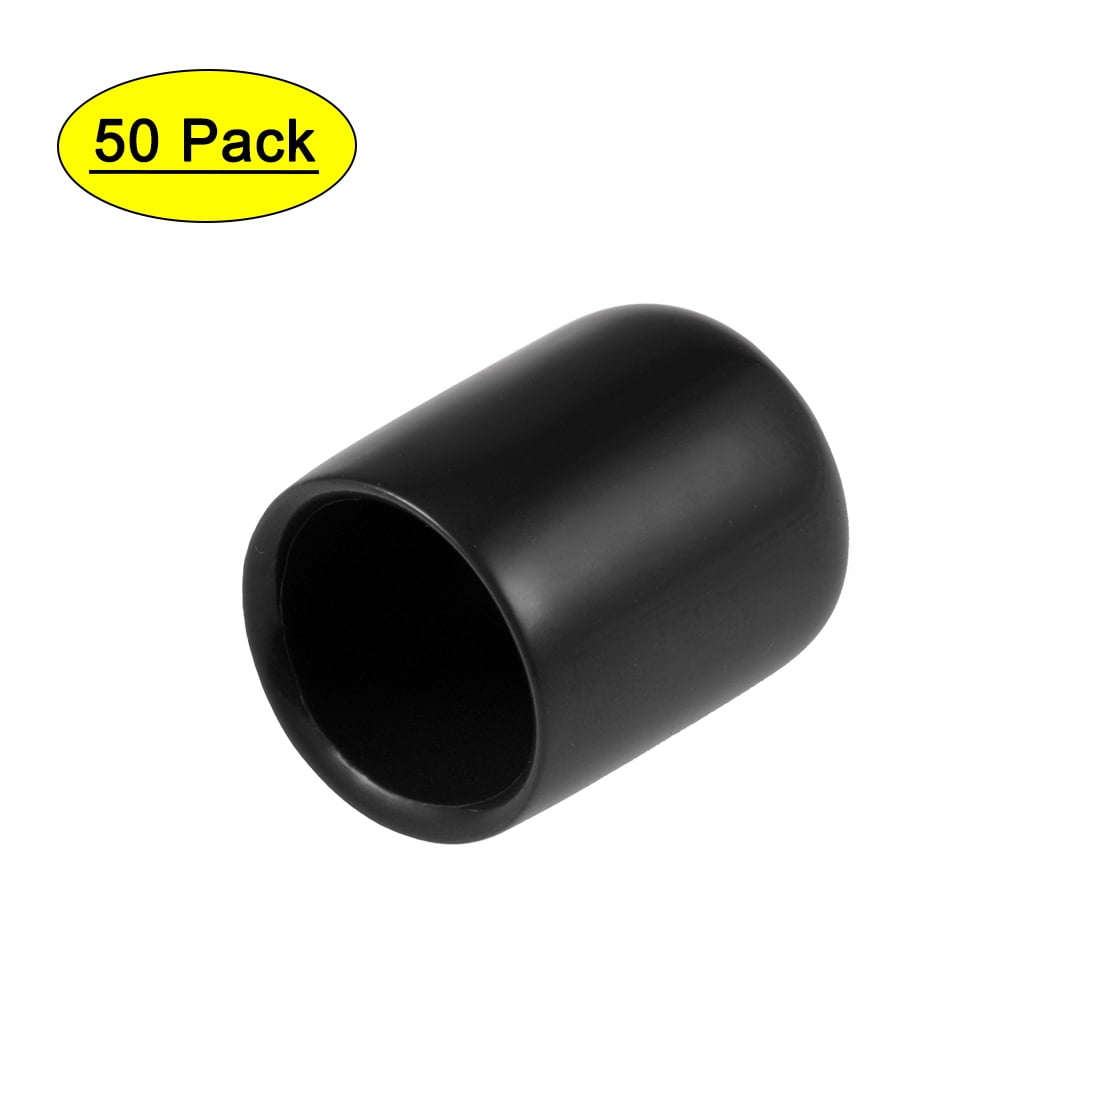 23 x 12 mm Black Rubber Screw Thread Protector Industrial Supplies Set of 50 